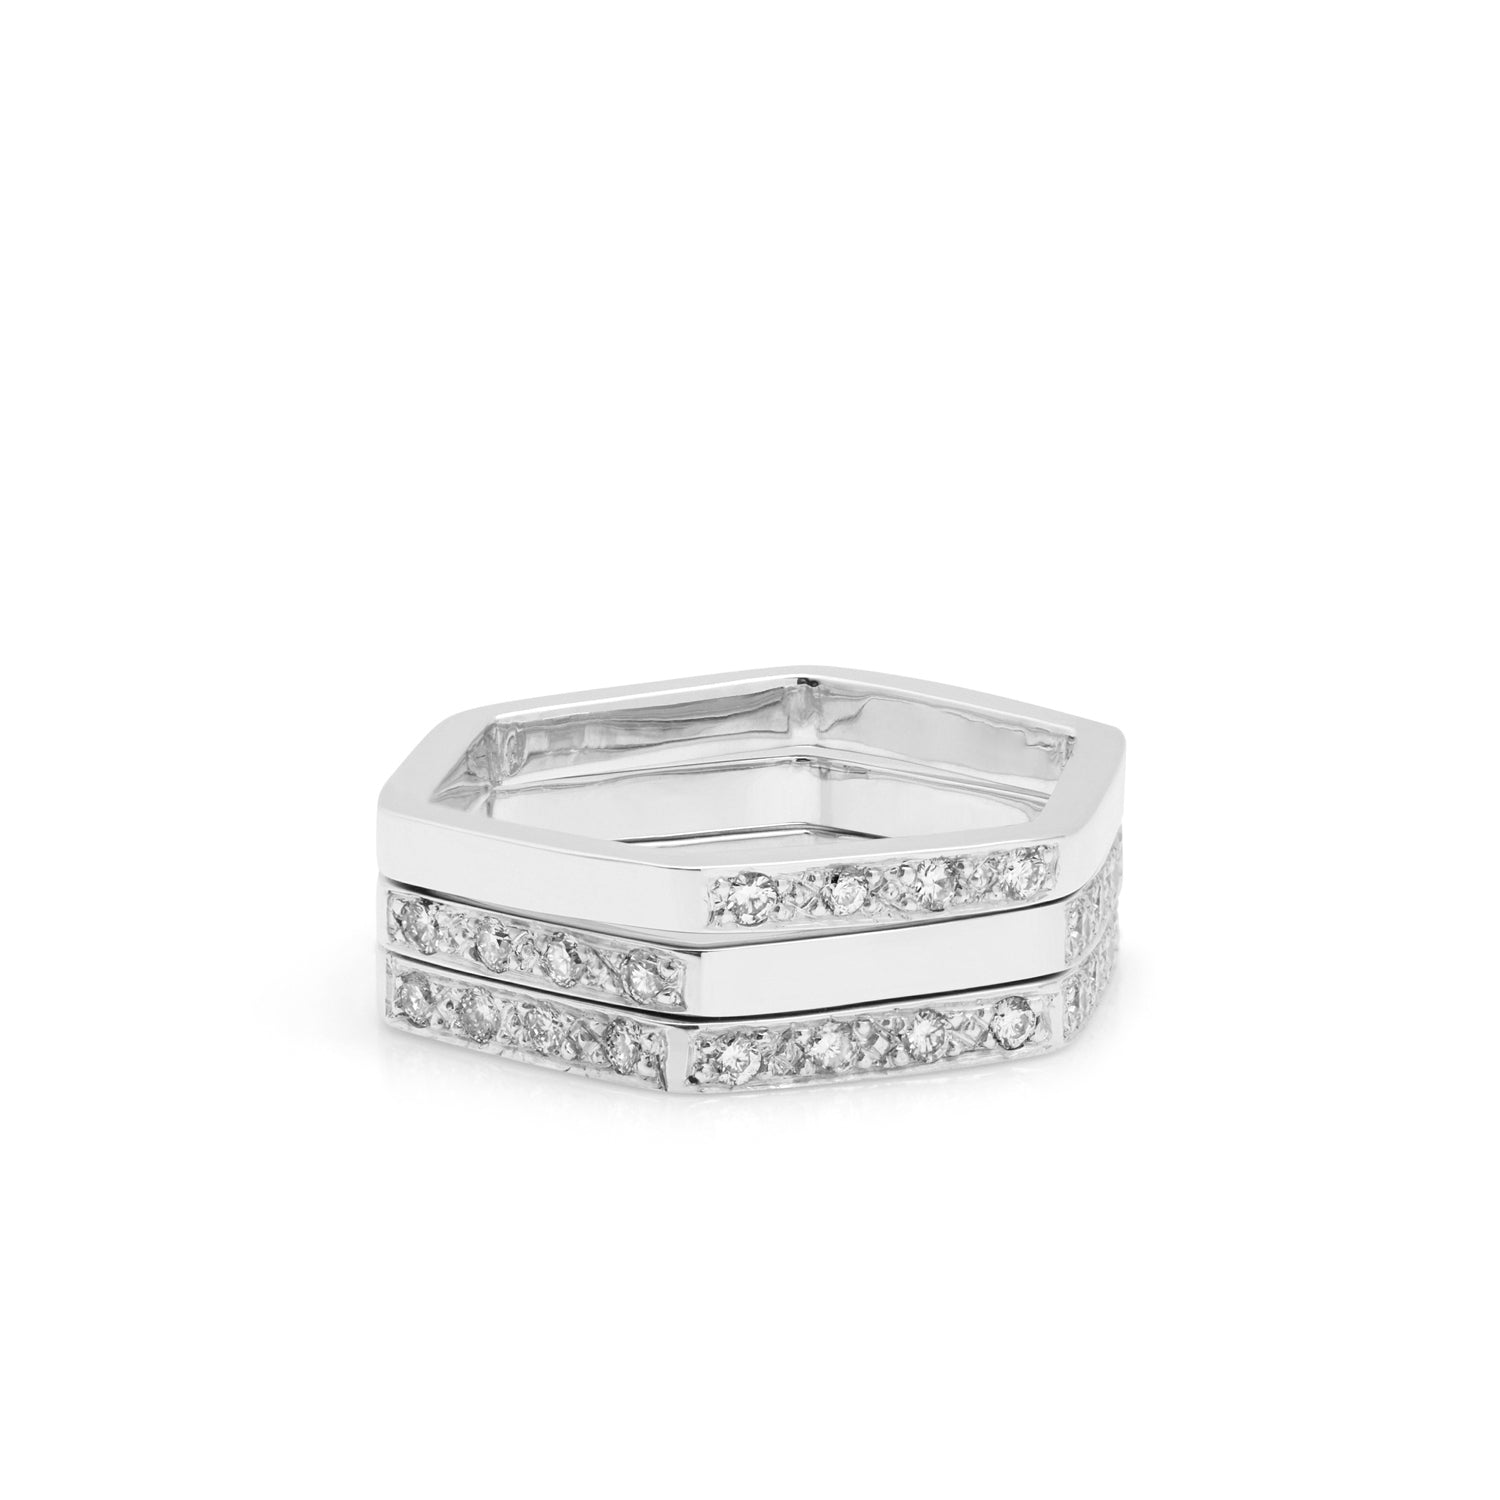 Hexagon Ring with Diamonds / 1 Side - 9k White Gold